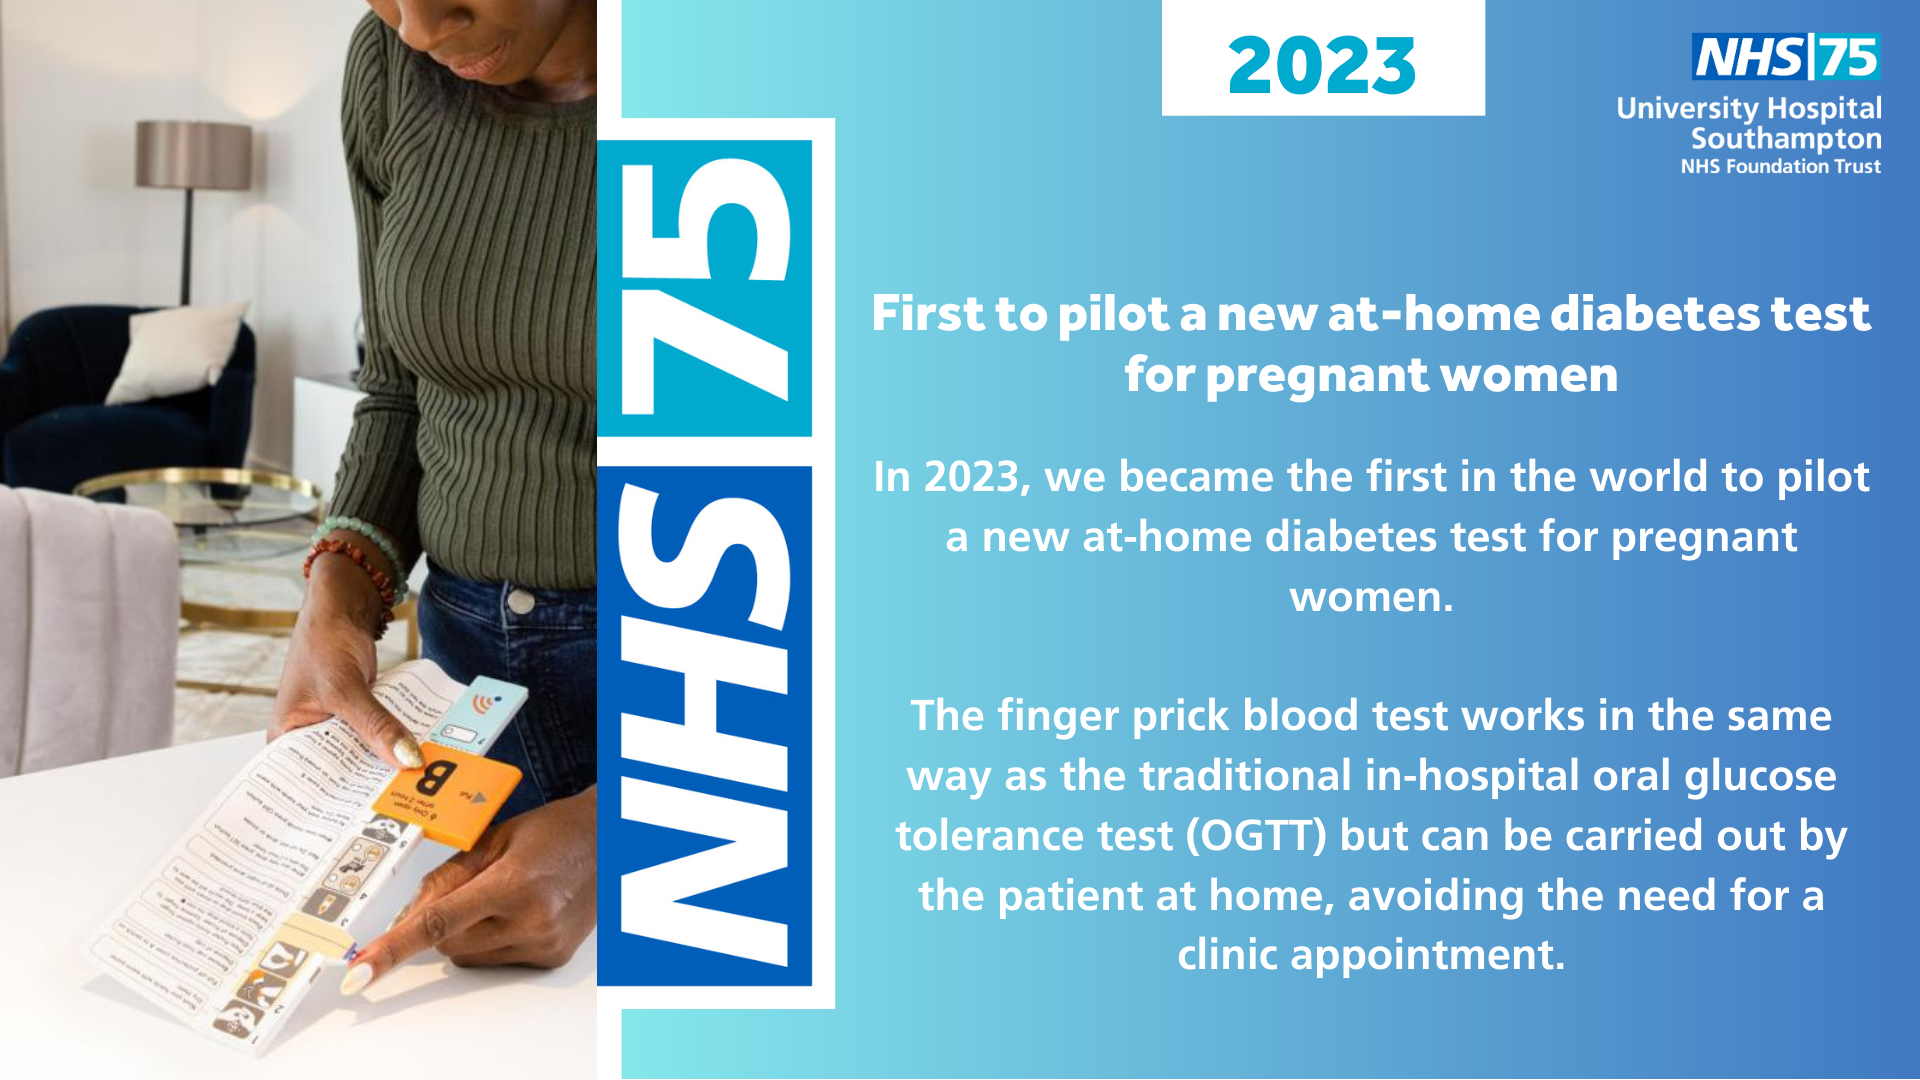 First to pilot a new at-home diabetes test for pregnant women